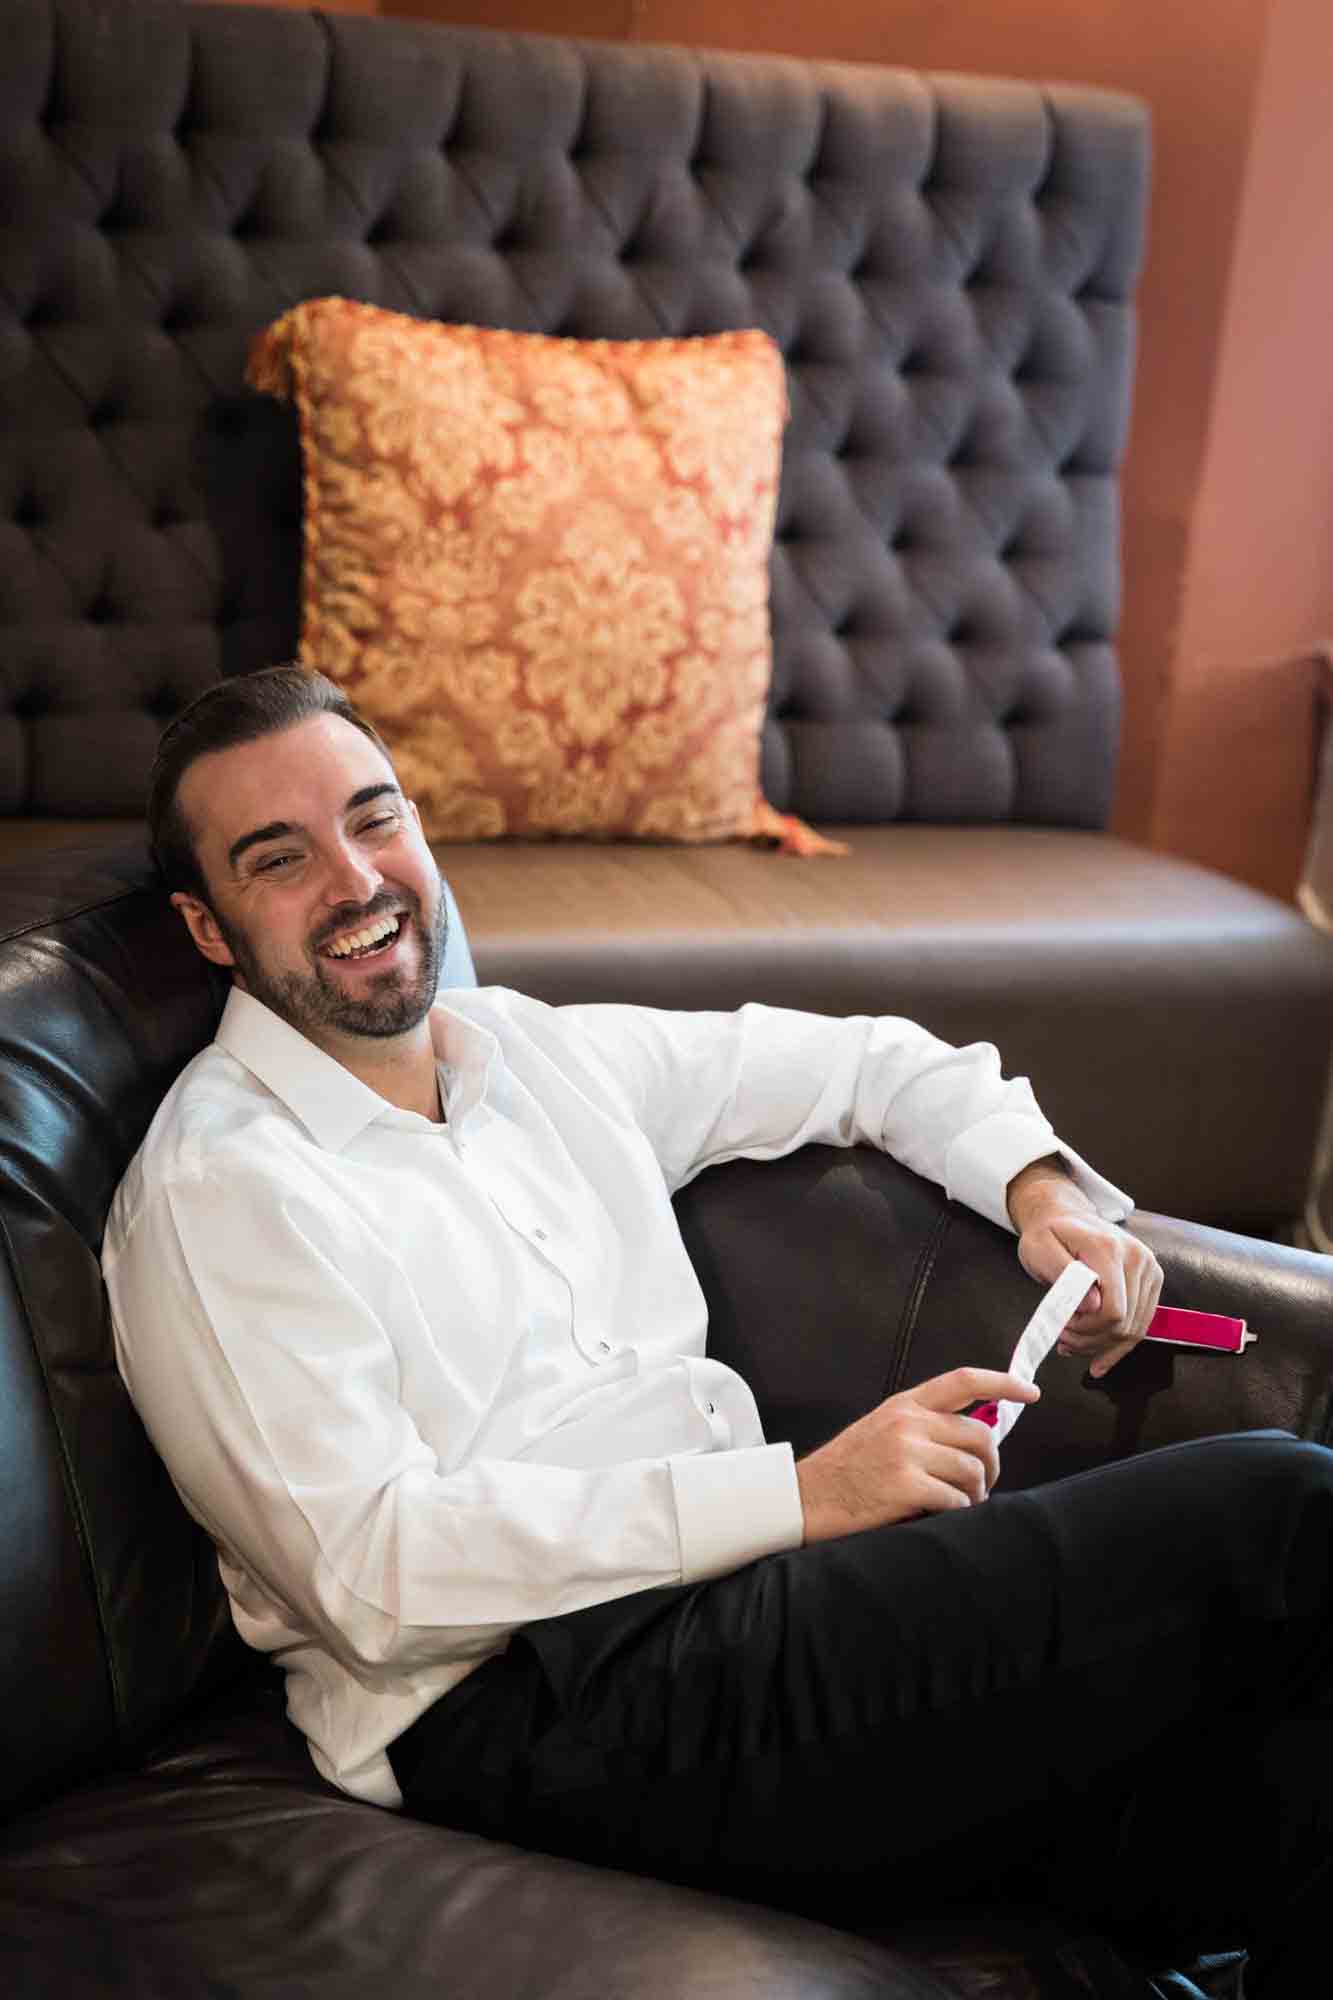 Groom laughing while wearing white shirt and sitting on leather couch at a Briarcliff Manor wedding